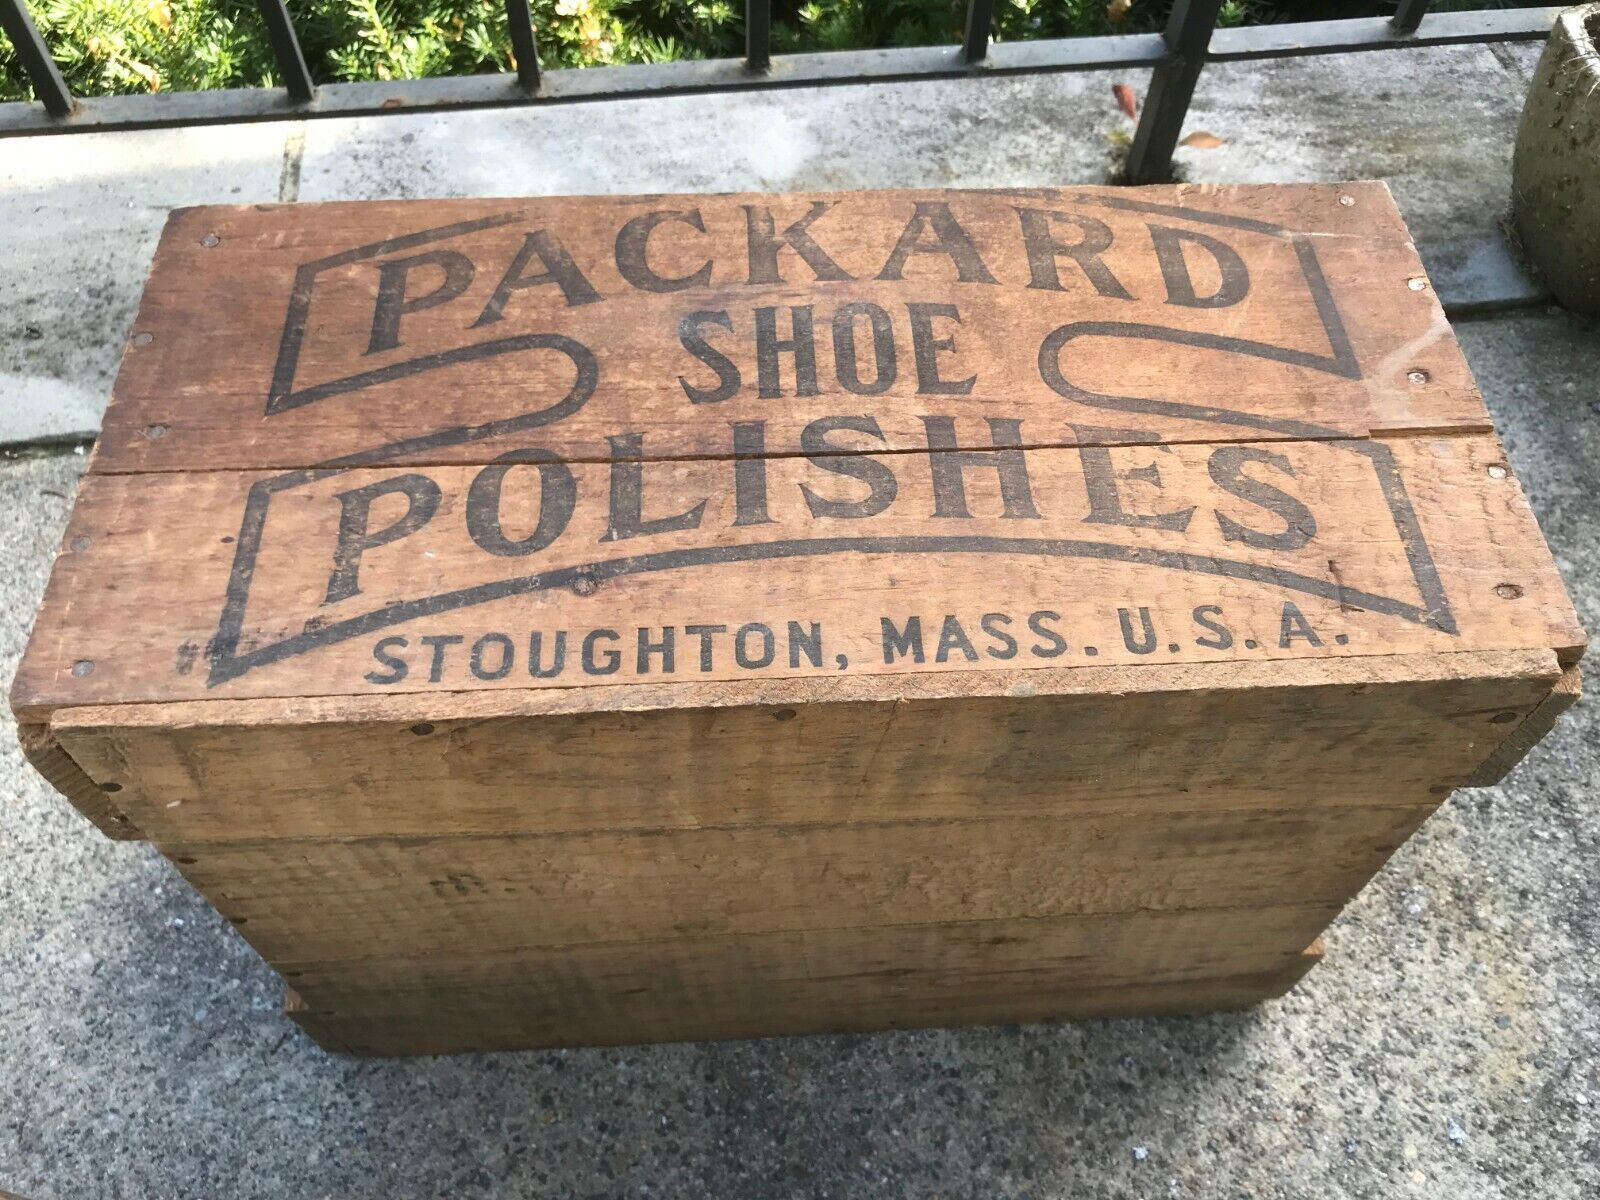 Vtg Antique Packard's Shoe Polishes Stoughton, Mass USA Wood Box Crate